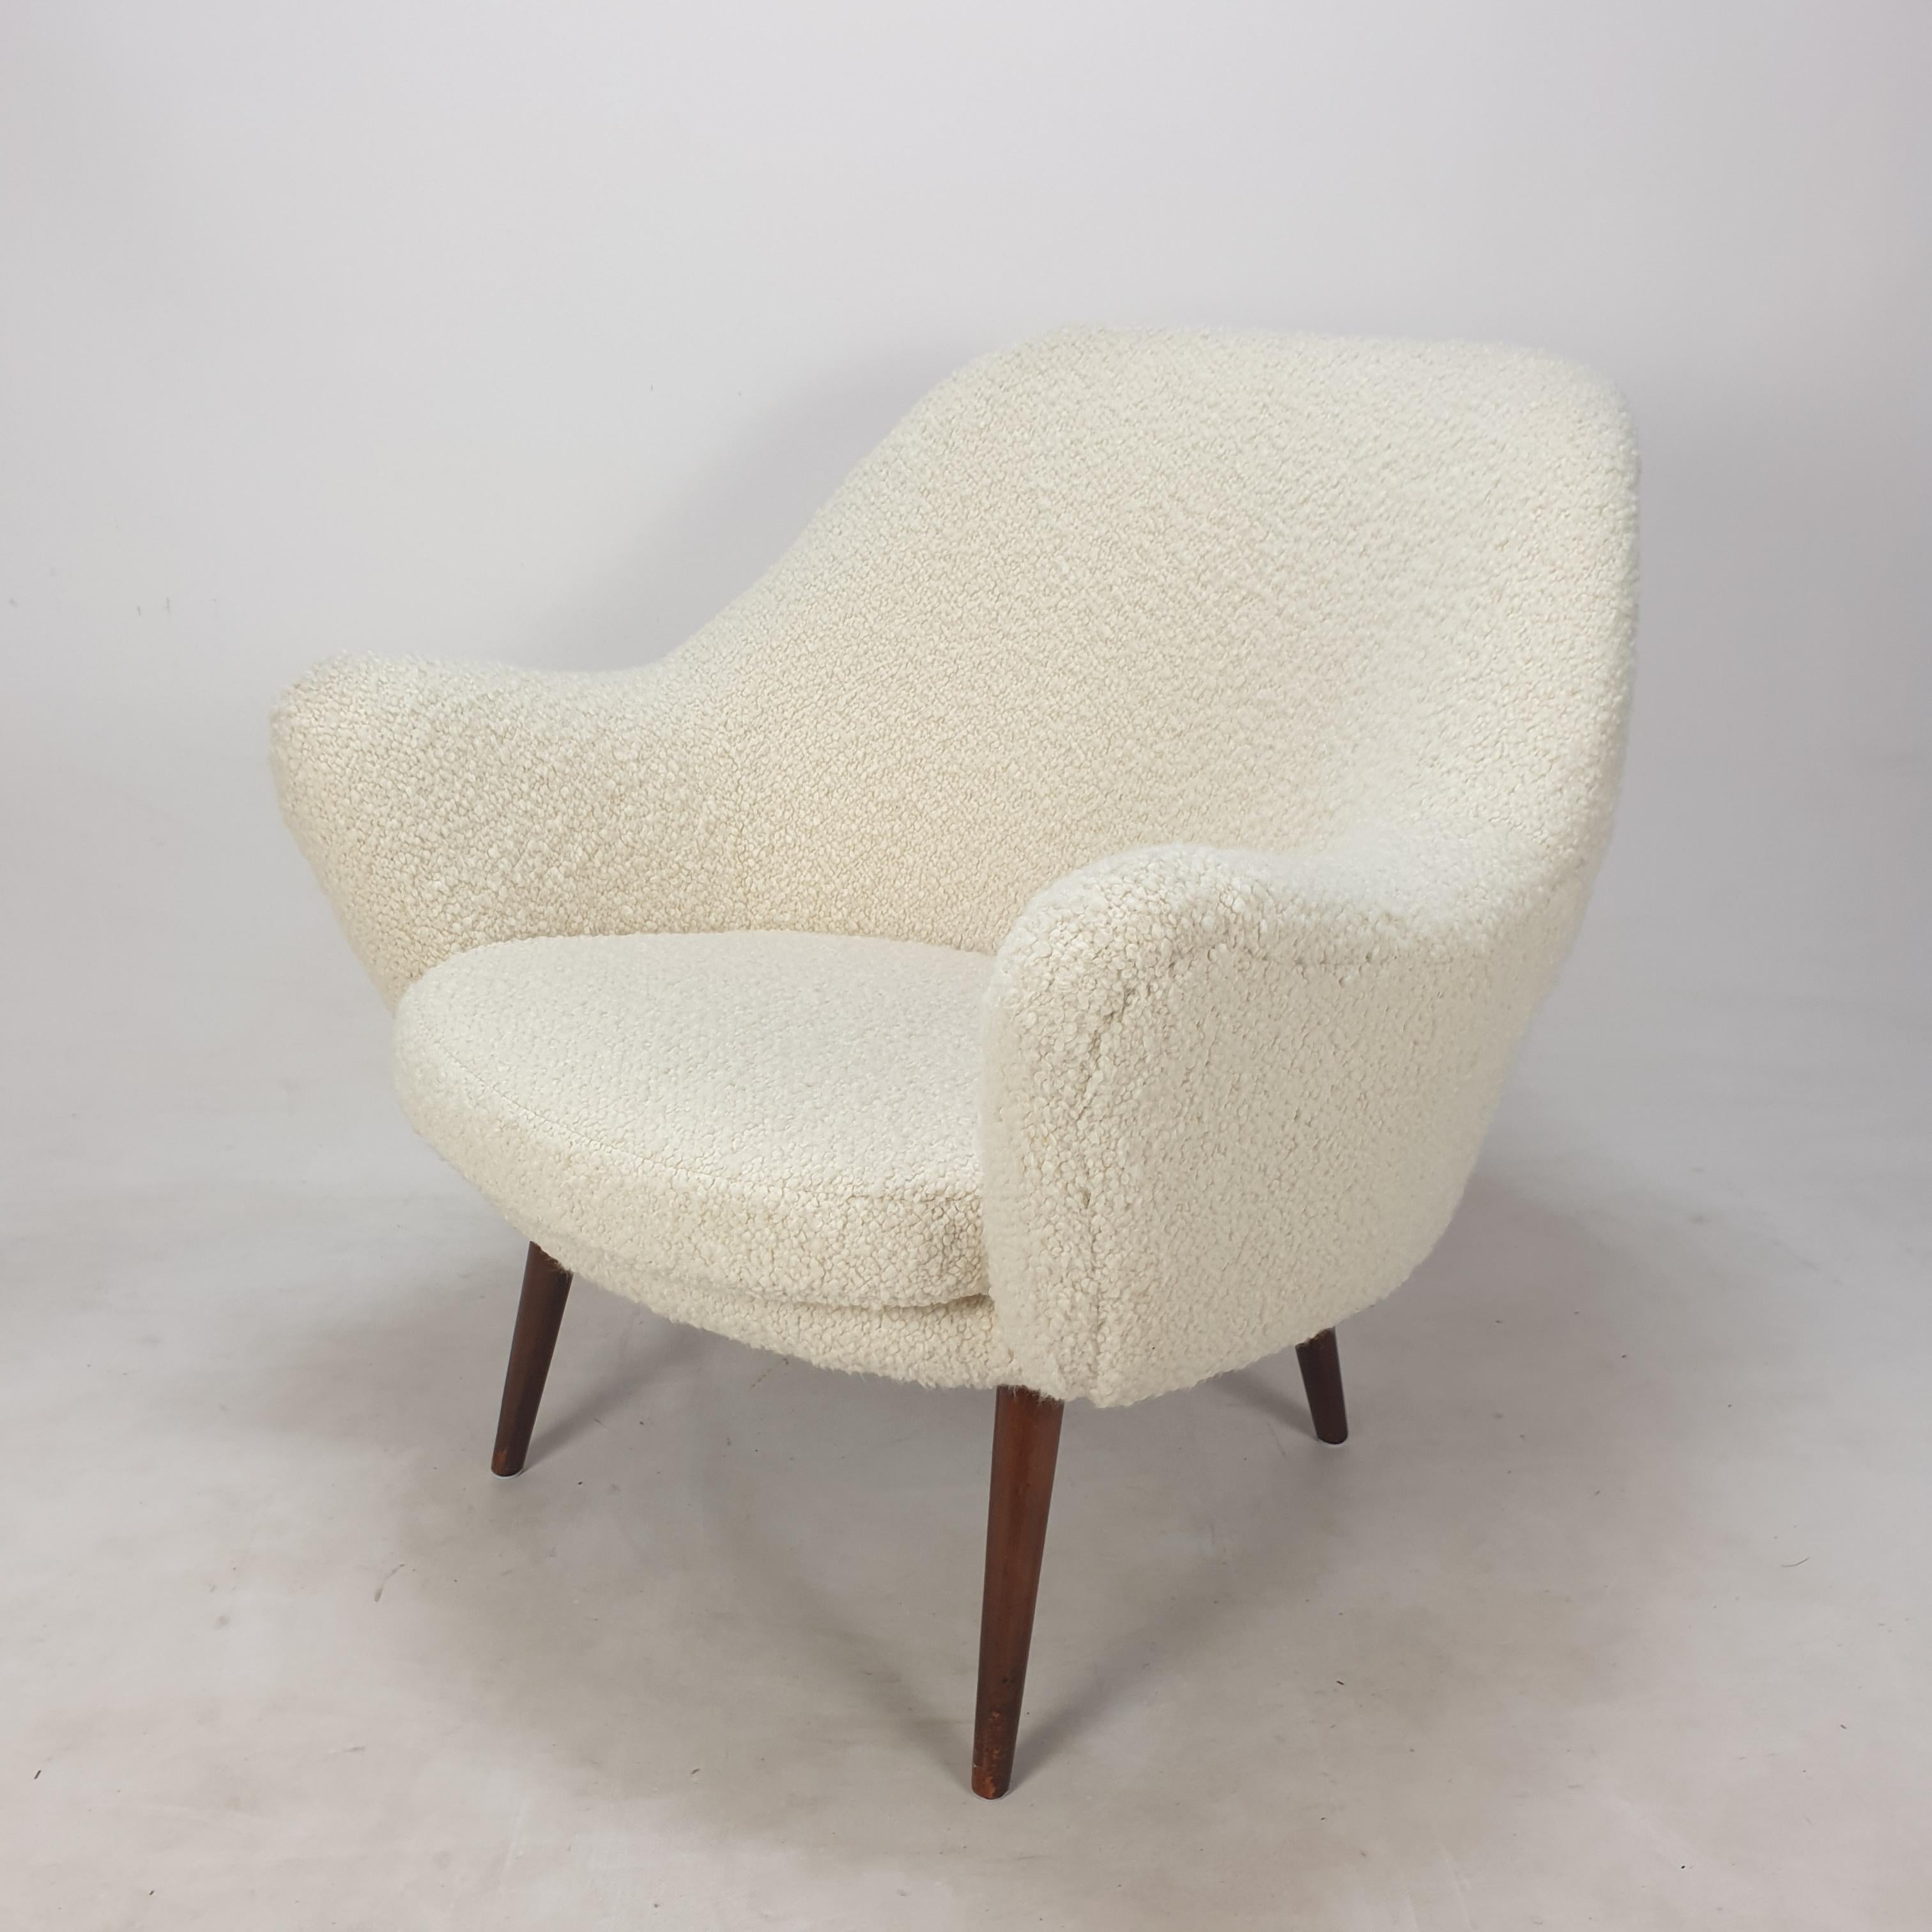 Stunning lounge chair designed and produced in Scandinavia, 1950's. 
It has a very comfortable seat.

The chair is just restored with new foam and new fabric, so it is in perfect condition.

It is reupholstered with very soft and cosy Italian